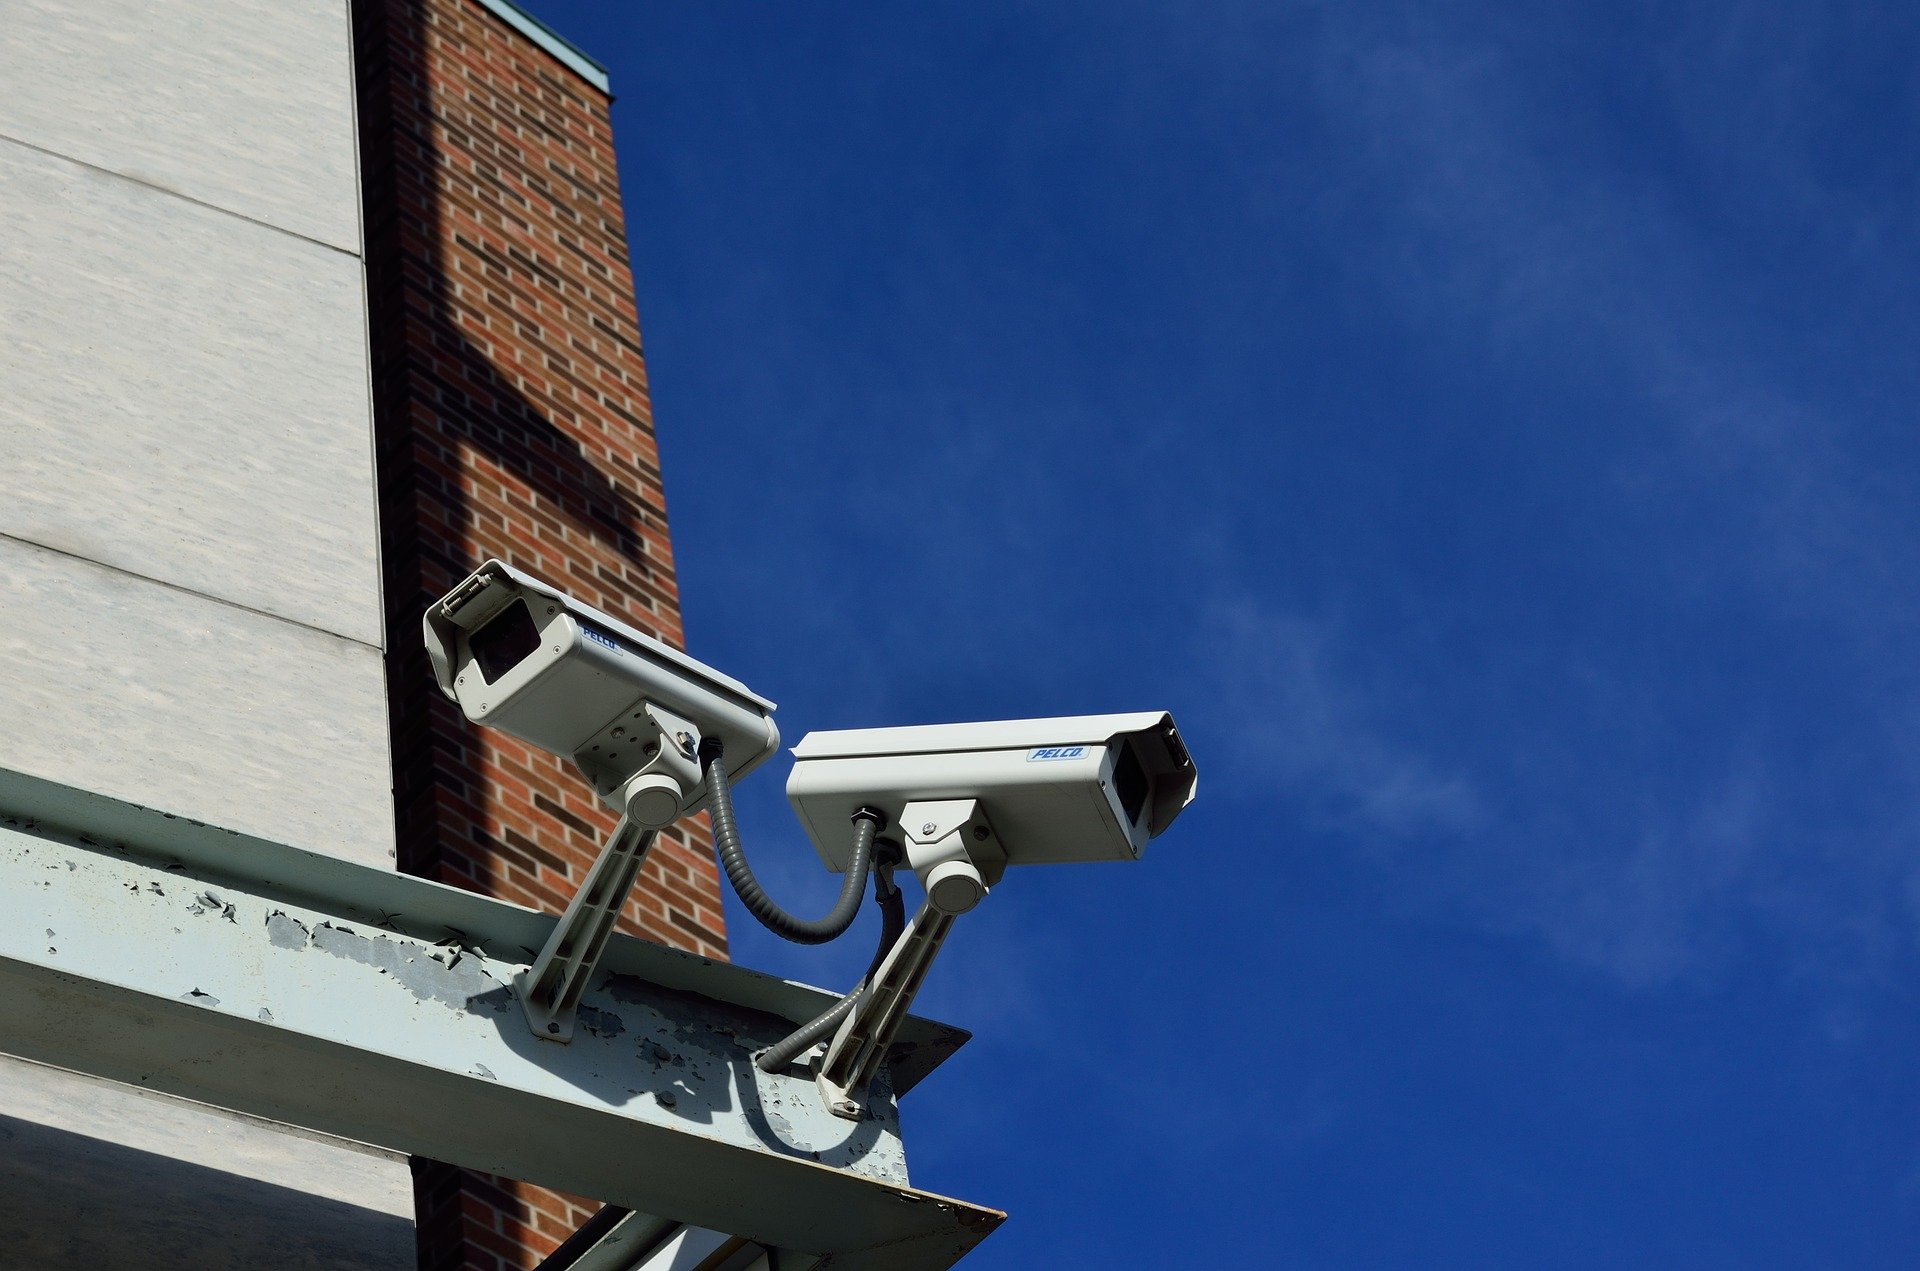 This Indian city has most CCTV cameras installed in public